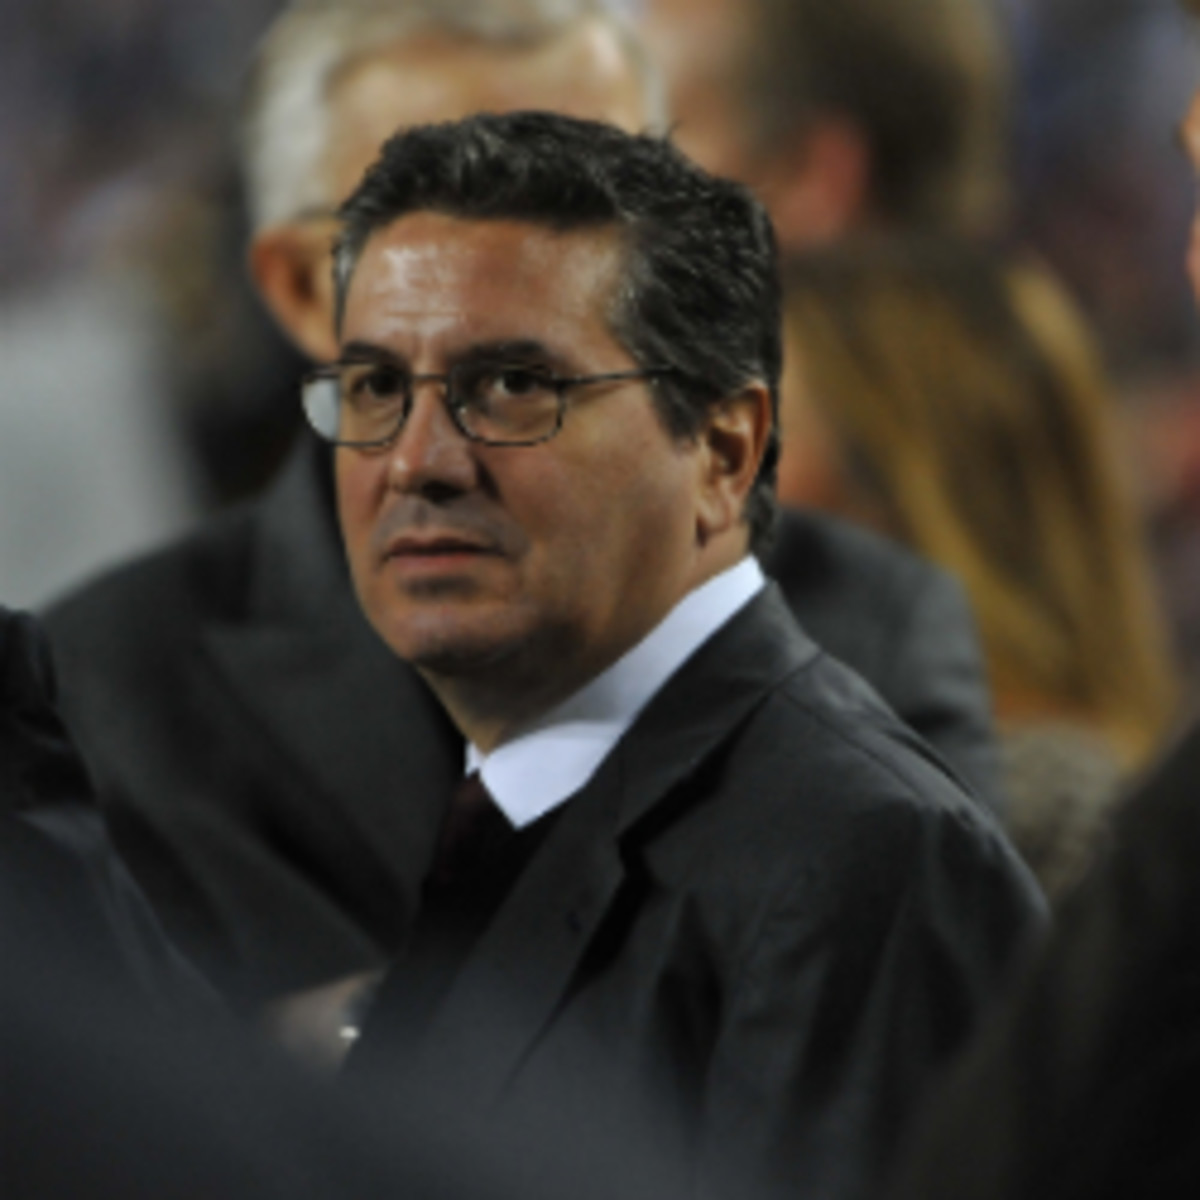 Redskins owner Dan Snyder said that the Redskins name would "never" change. (Larry French/Getty Images)